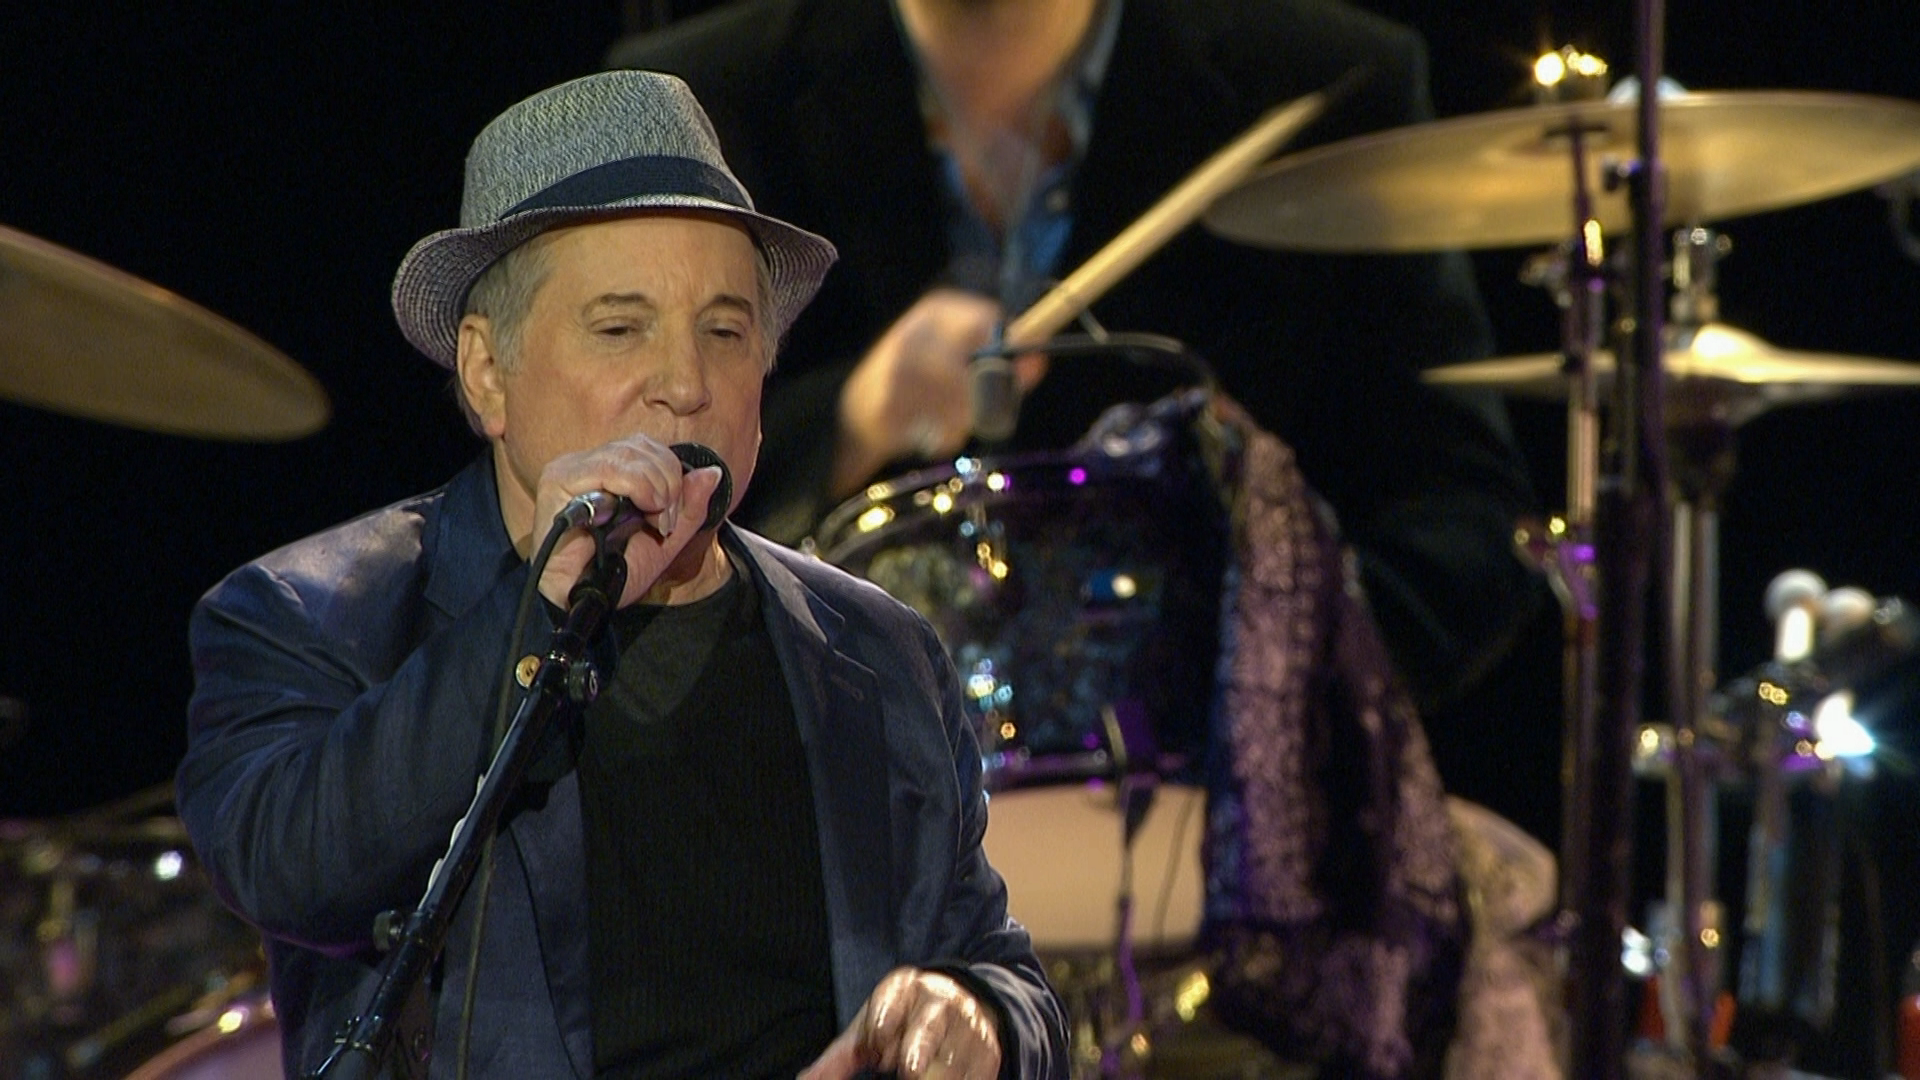 Paul Simon.The Concert in Hyde Park.2017_20171027_200926.952.png